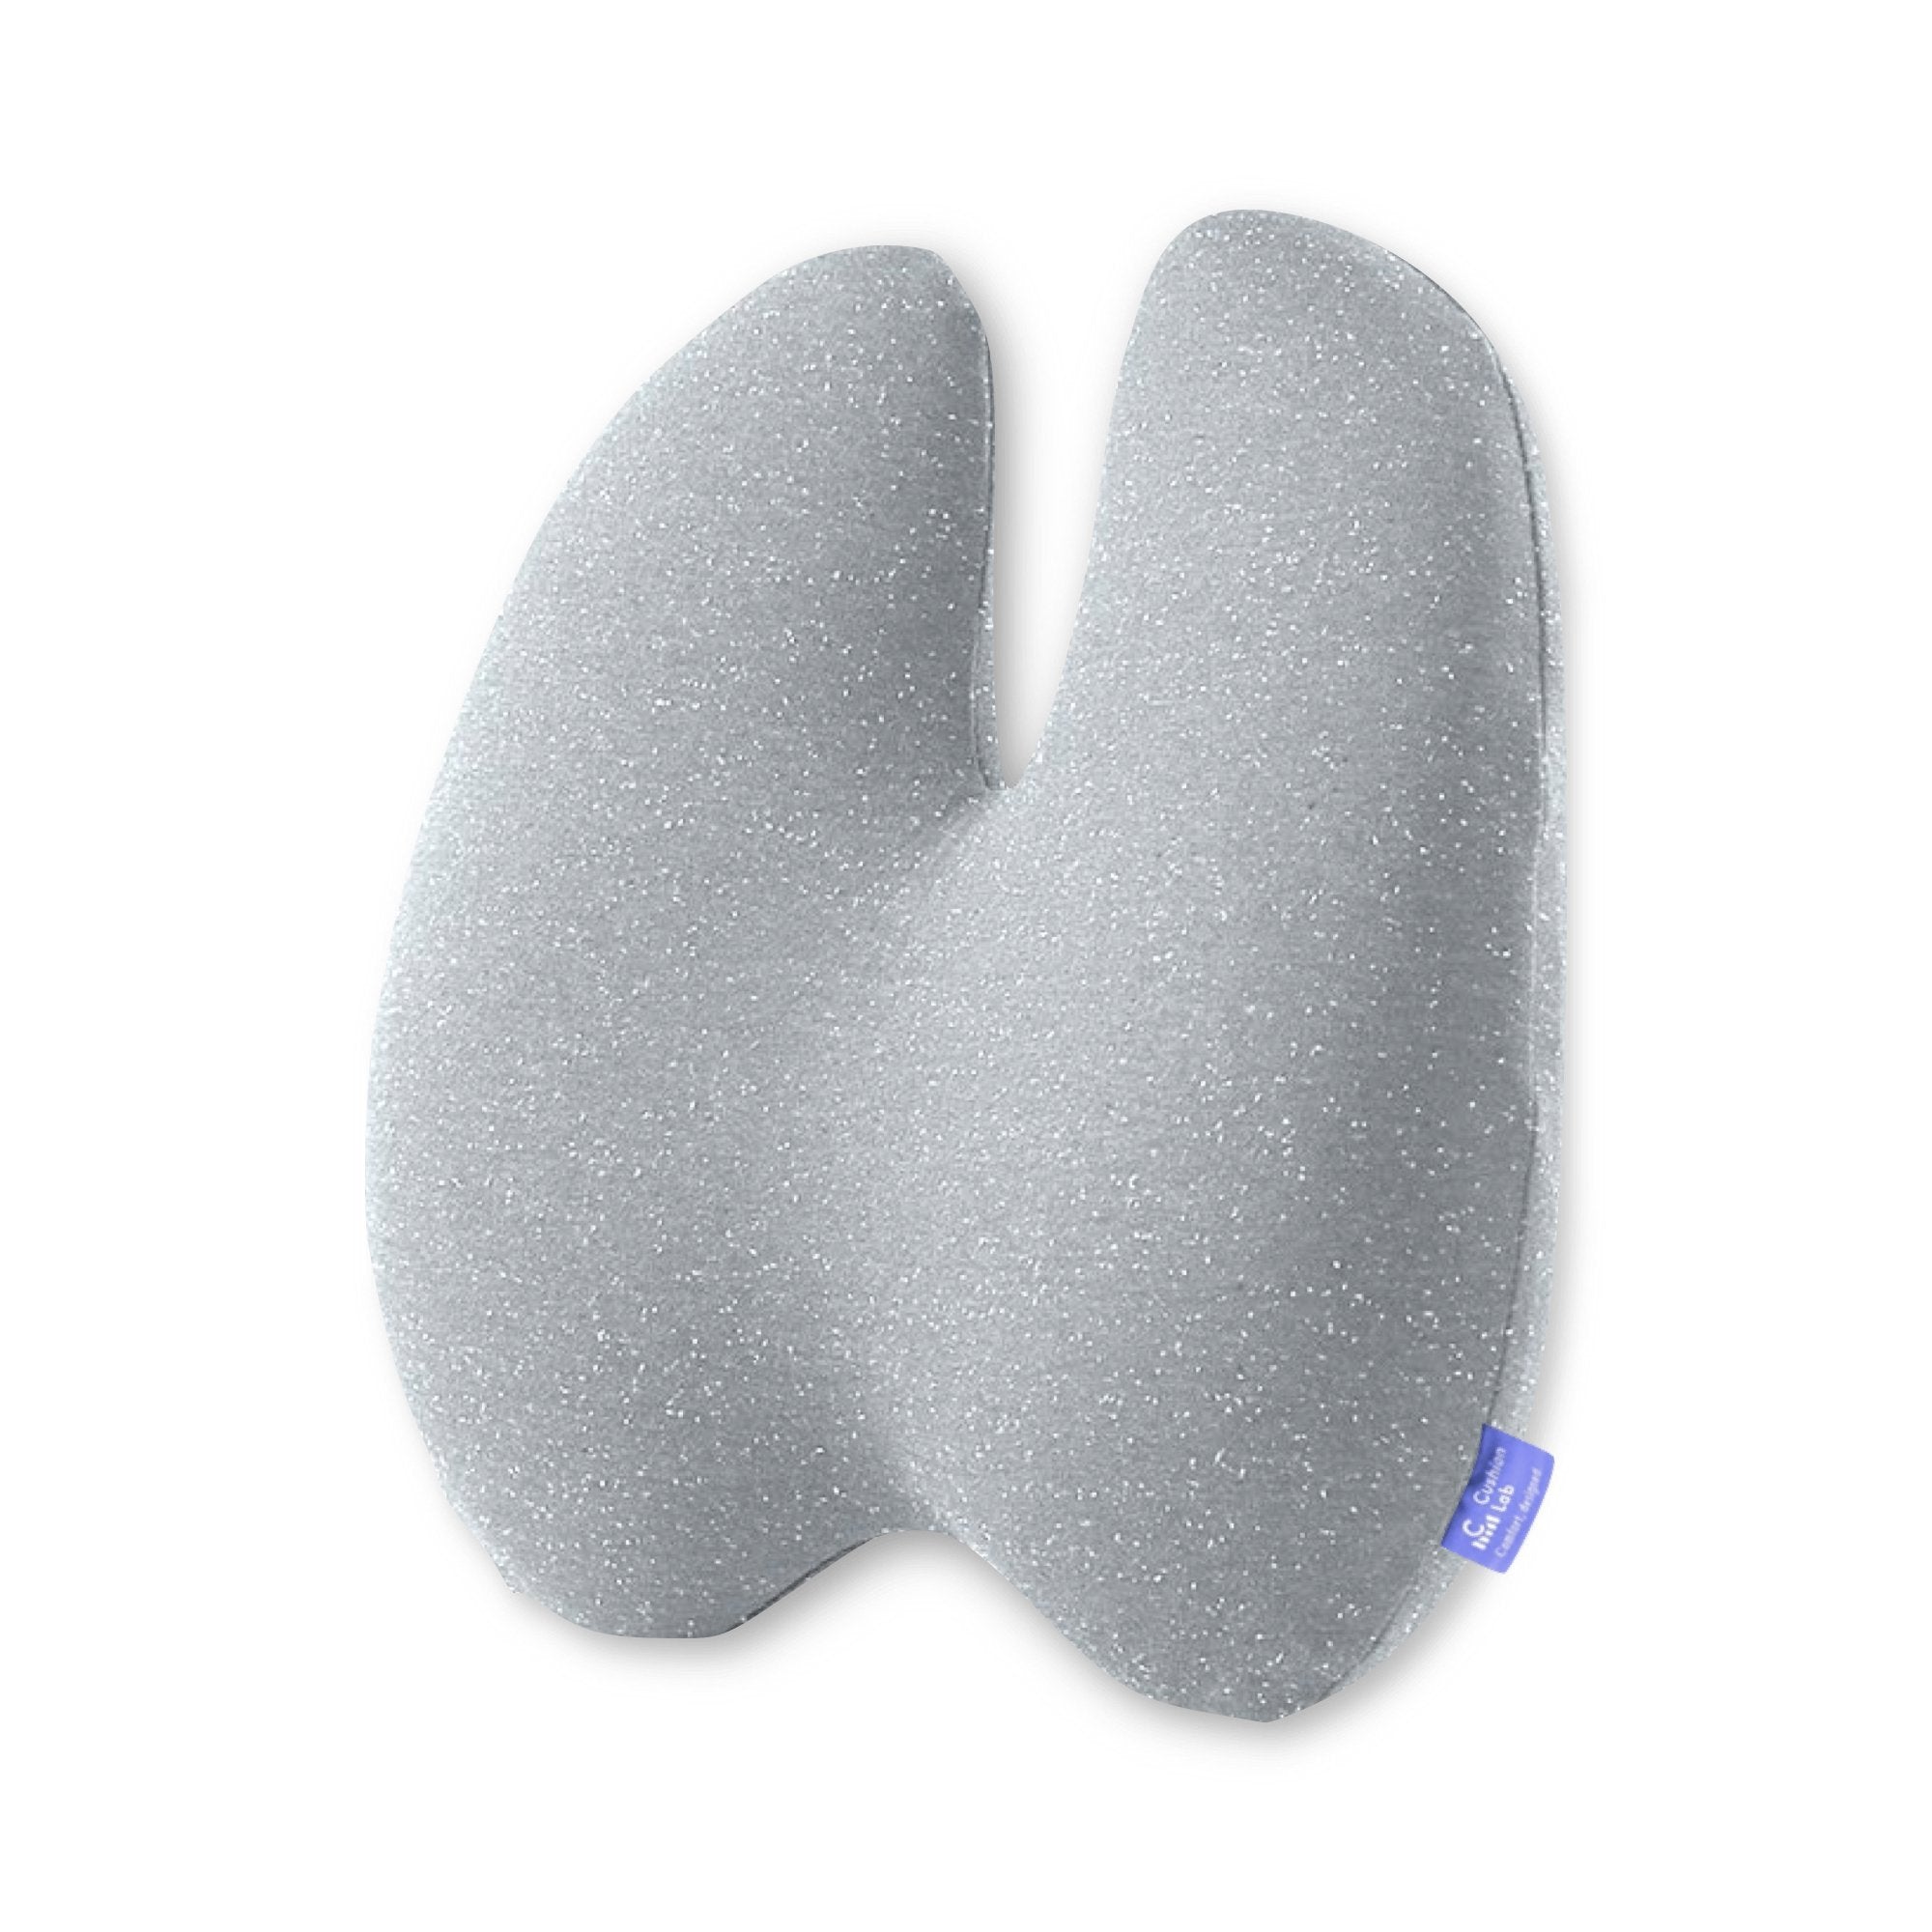 Which lumbar pillow is best for back pain?